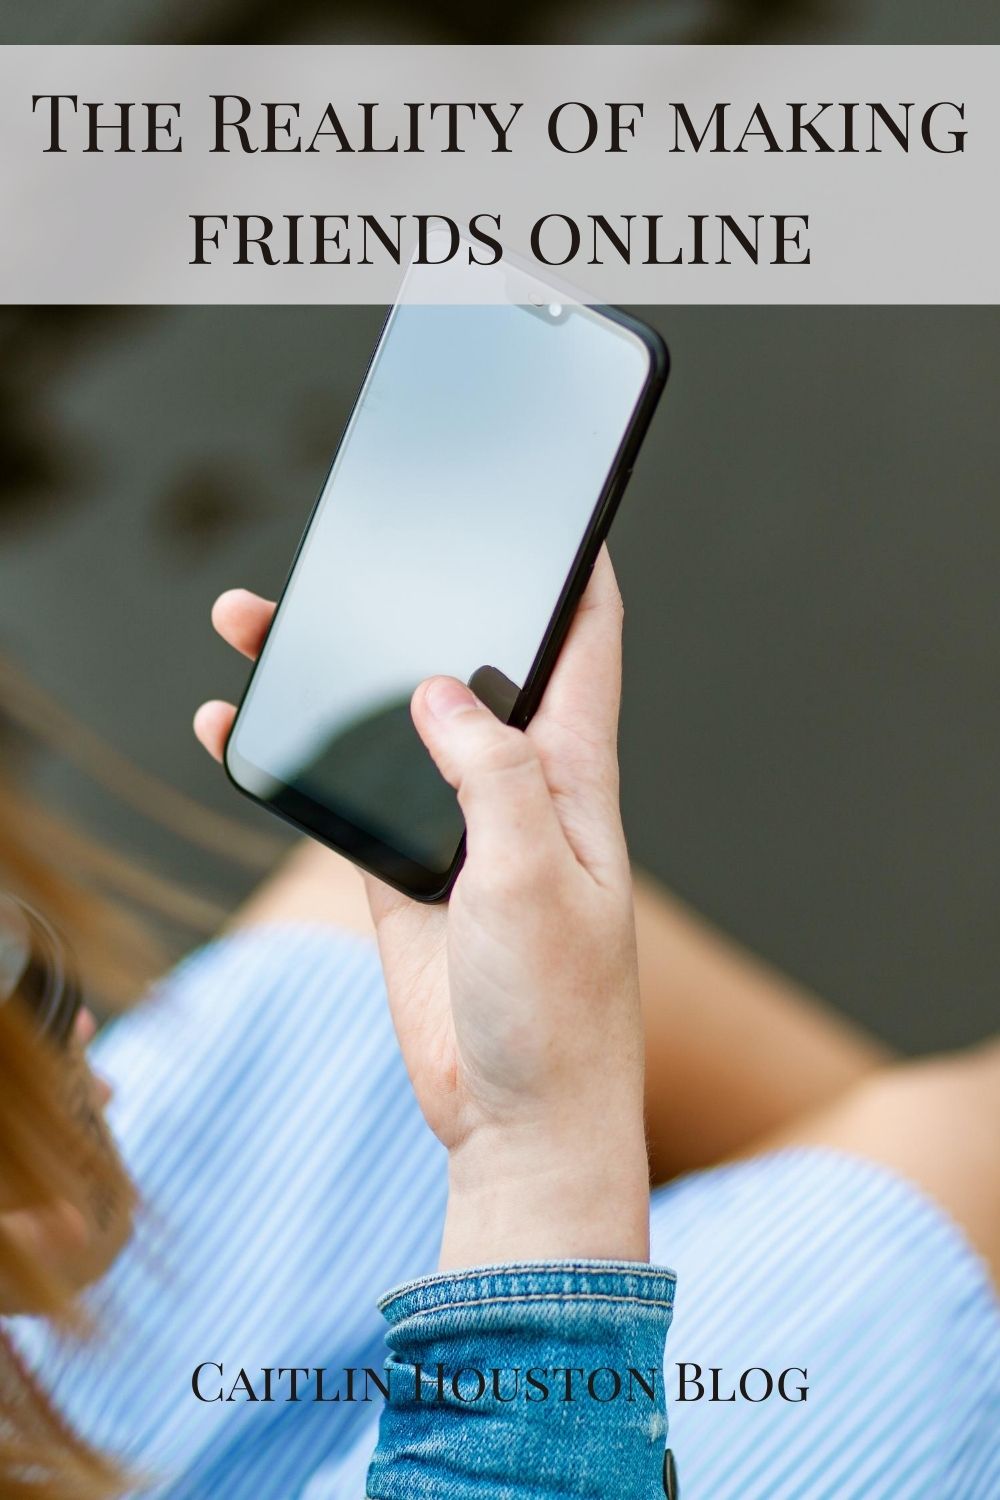 What is the reality of online friendships? Today I'm sharing what I perceive to be the problem with making friends over the Internet.